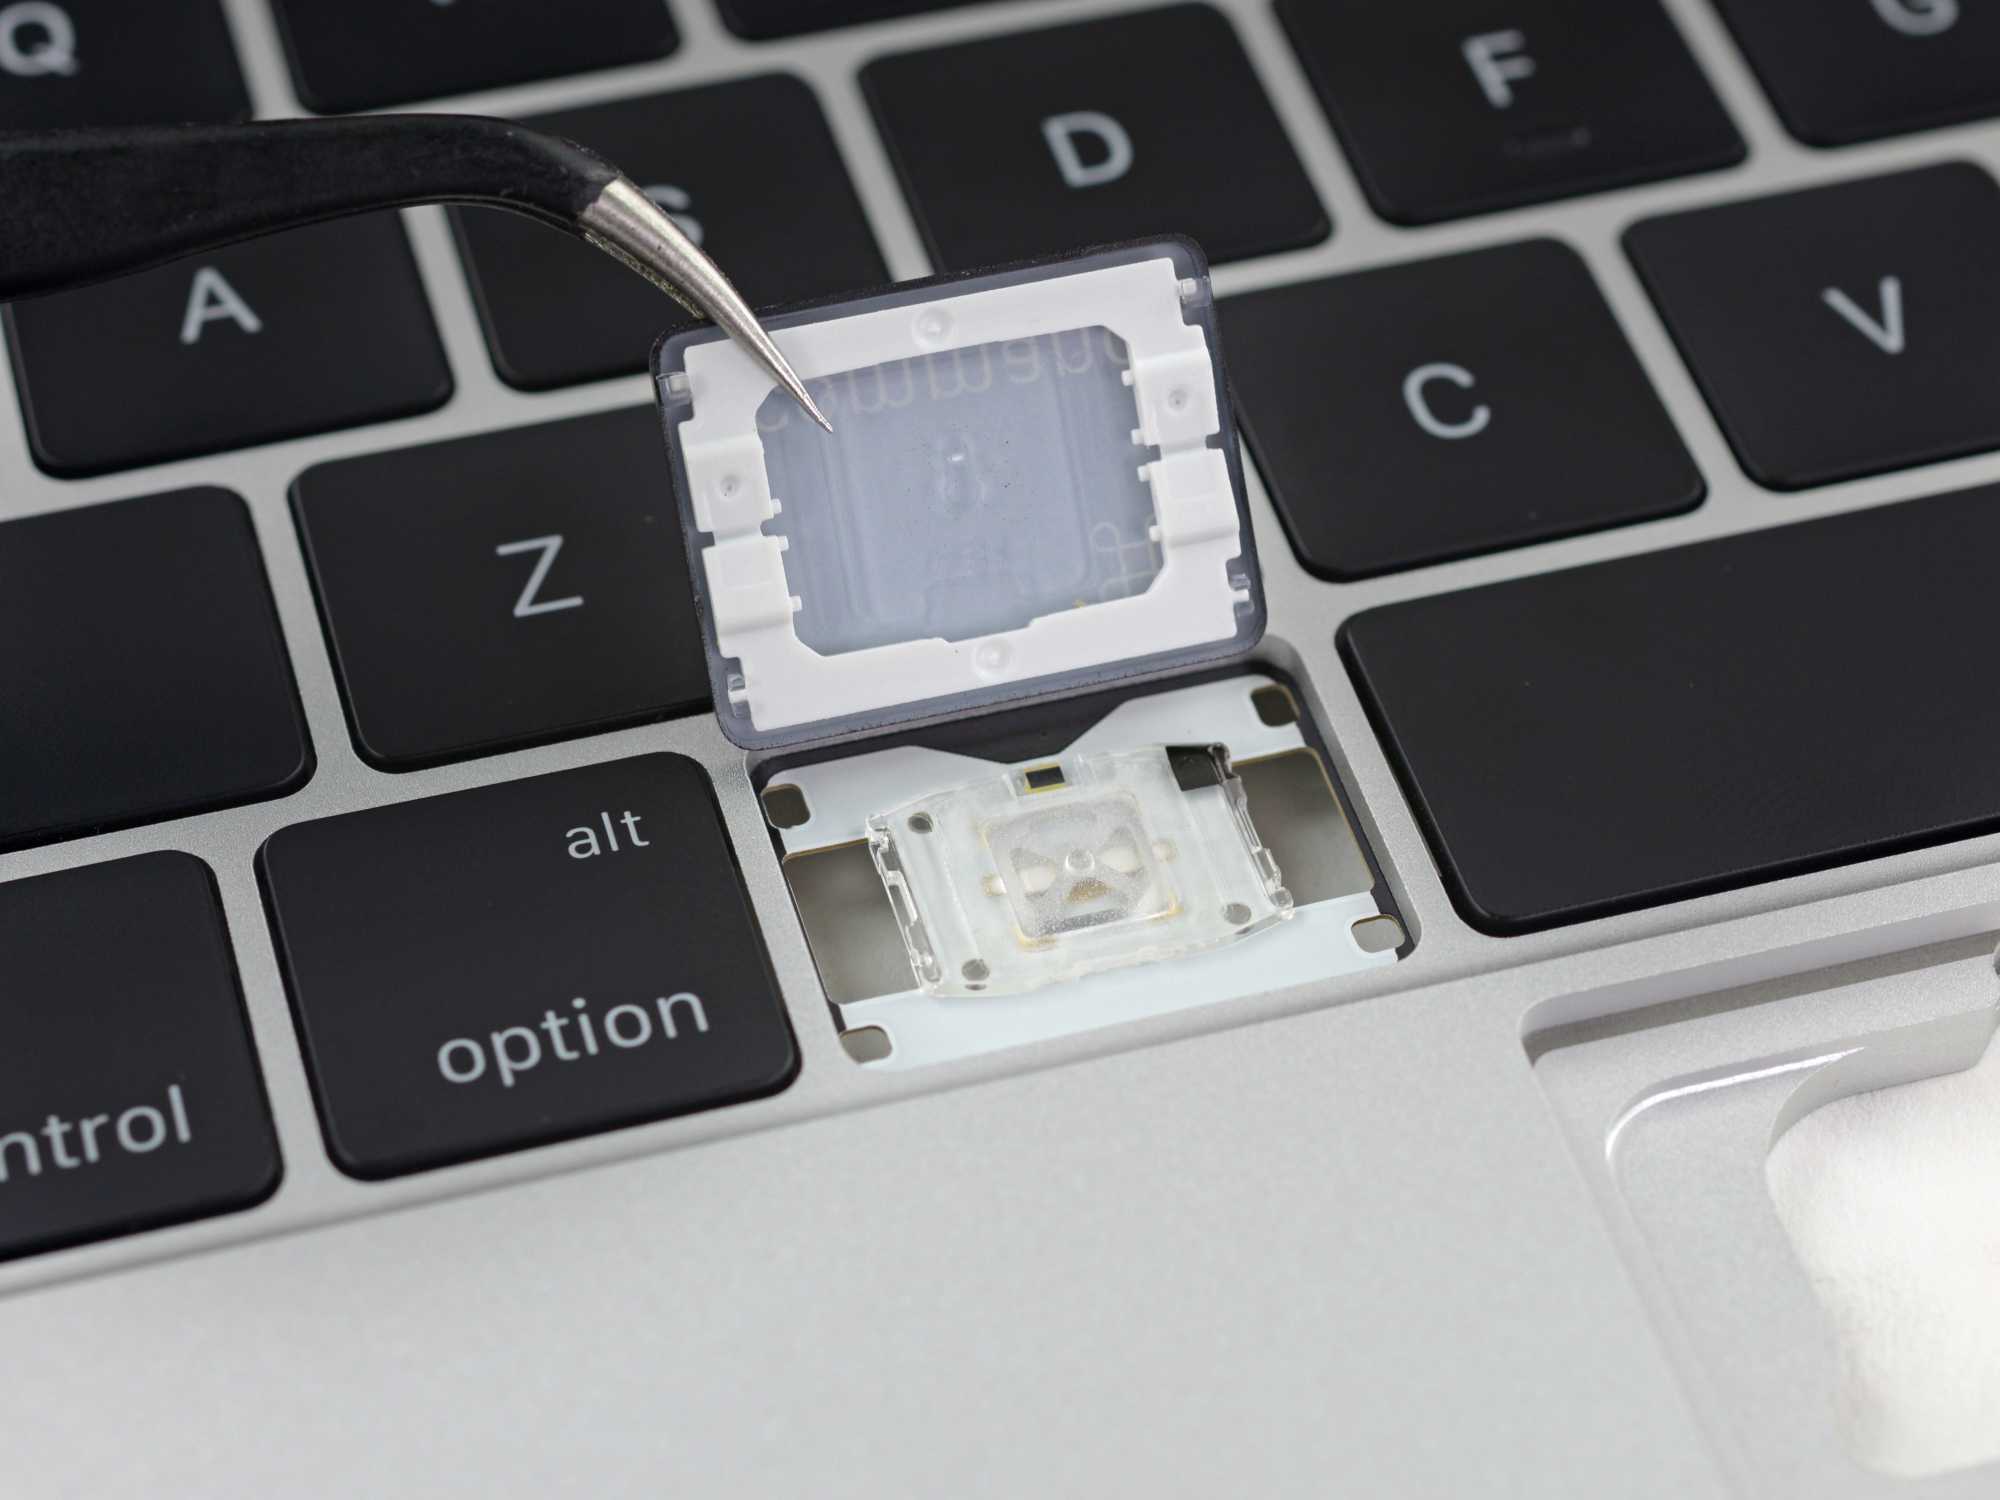   MacBook and MacBook Pro: Single The buttons can not be repaired irreparably "style =" width: 100%; 